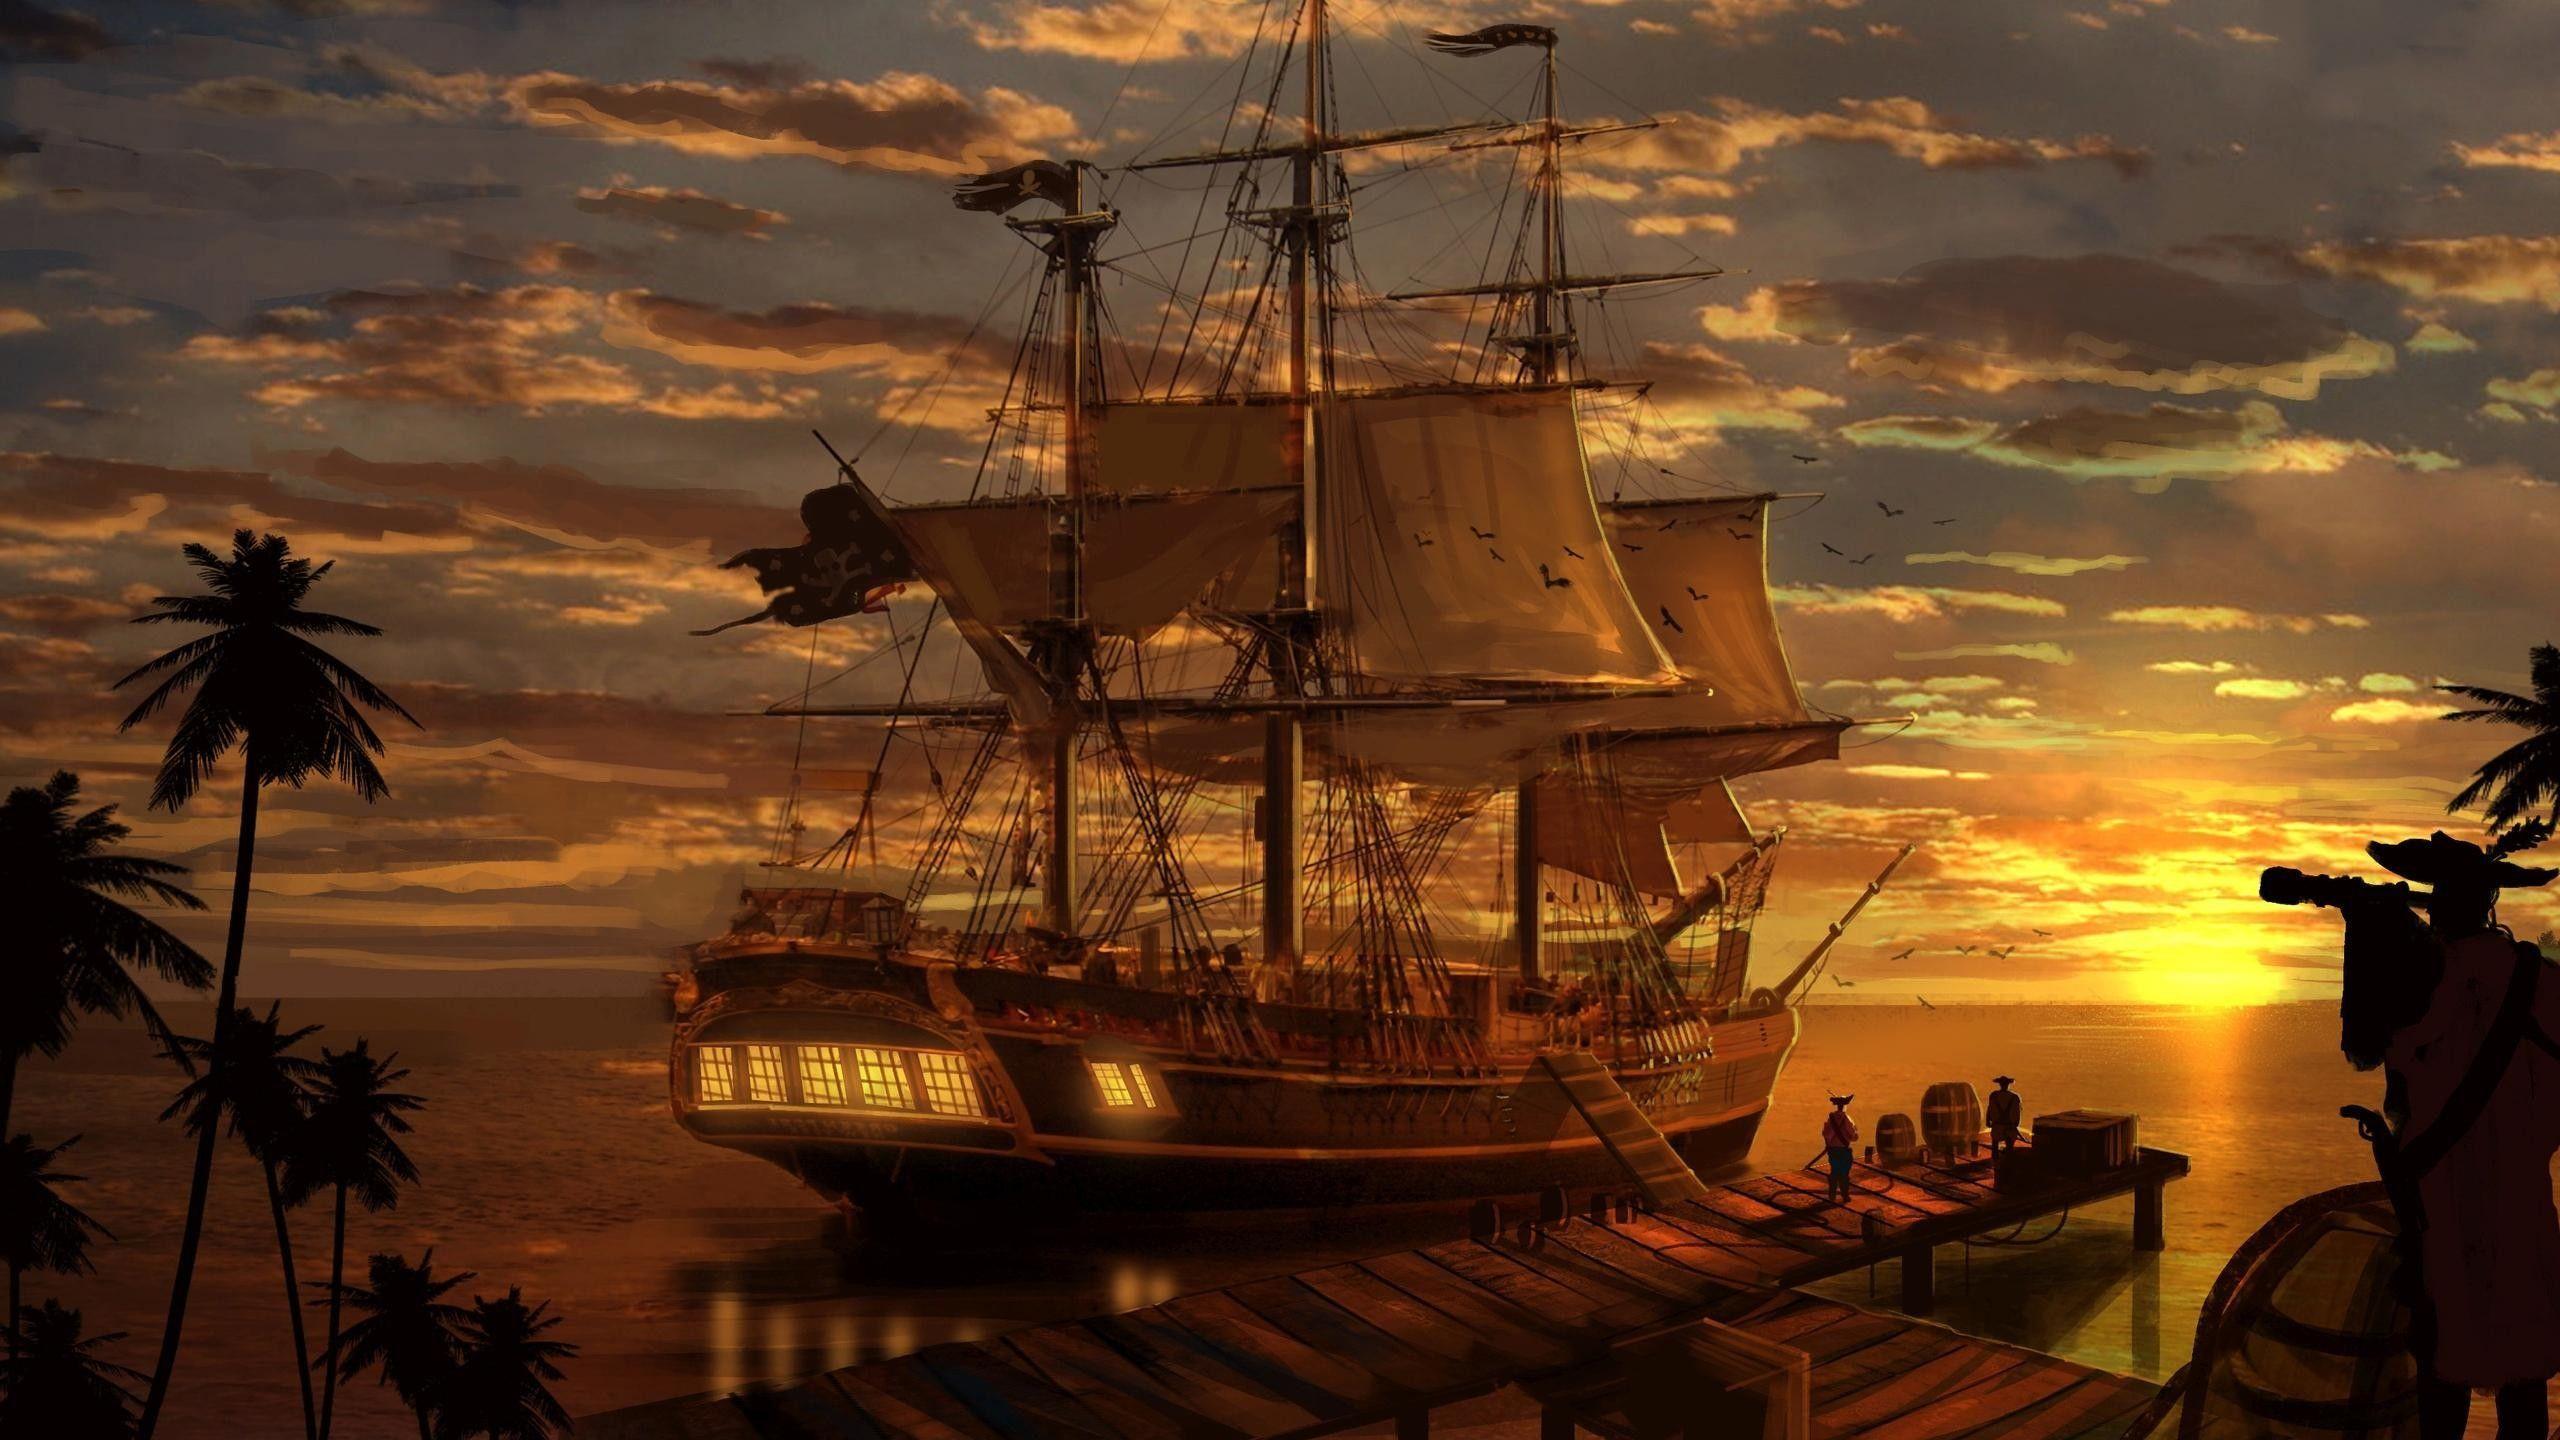 Pirate Ship Wallpaper HD Resolution On Wallpaper 1080p HD. Picture to paint, Boat wallpaper, Oil painting picture